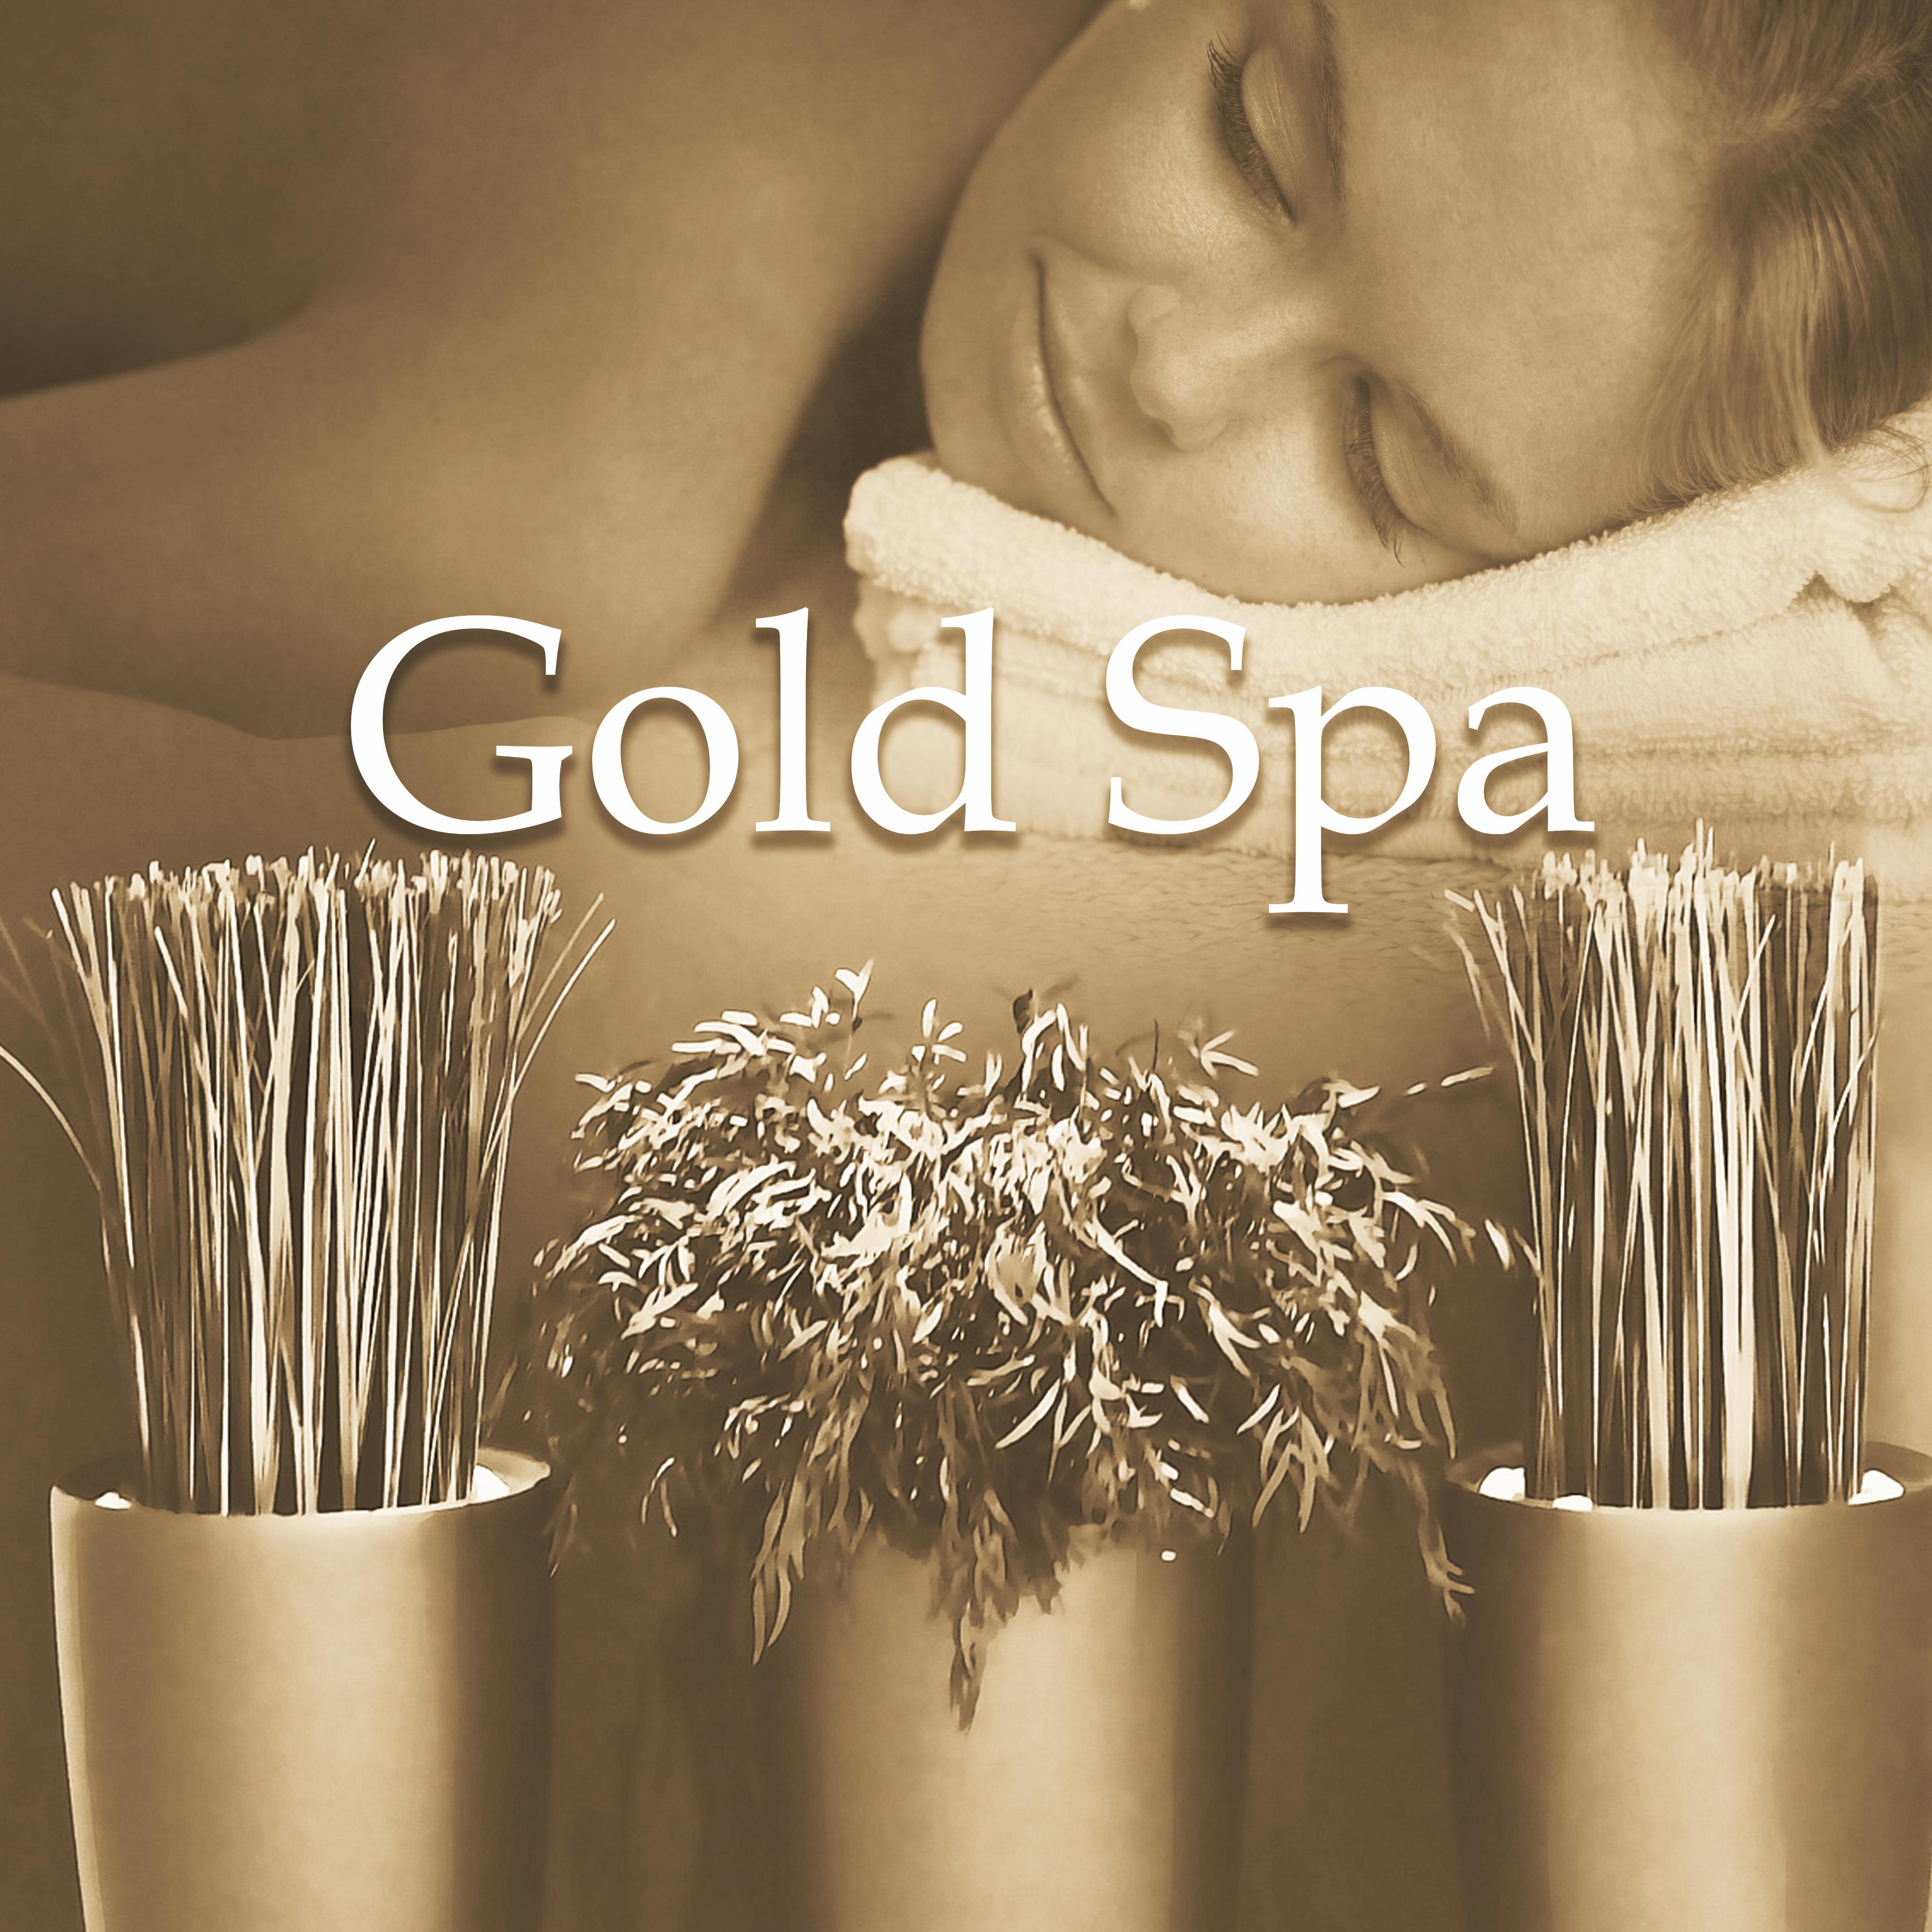 Gold Spa – Sounds of Sea, Soft Music for Relaxation, Stress Relief, Asian Music, Relaxing Therapy for Wellness, Nature Sounds, Zen, Deep Massage